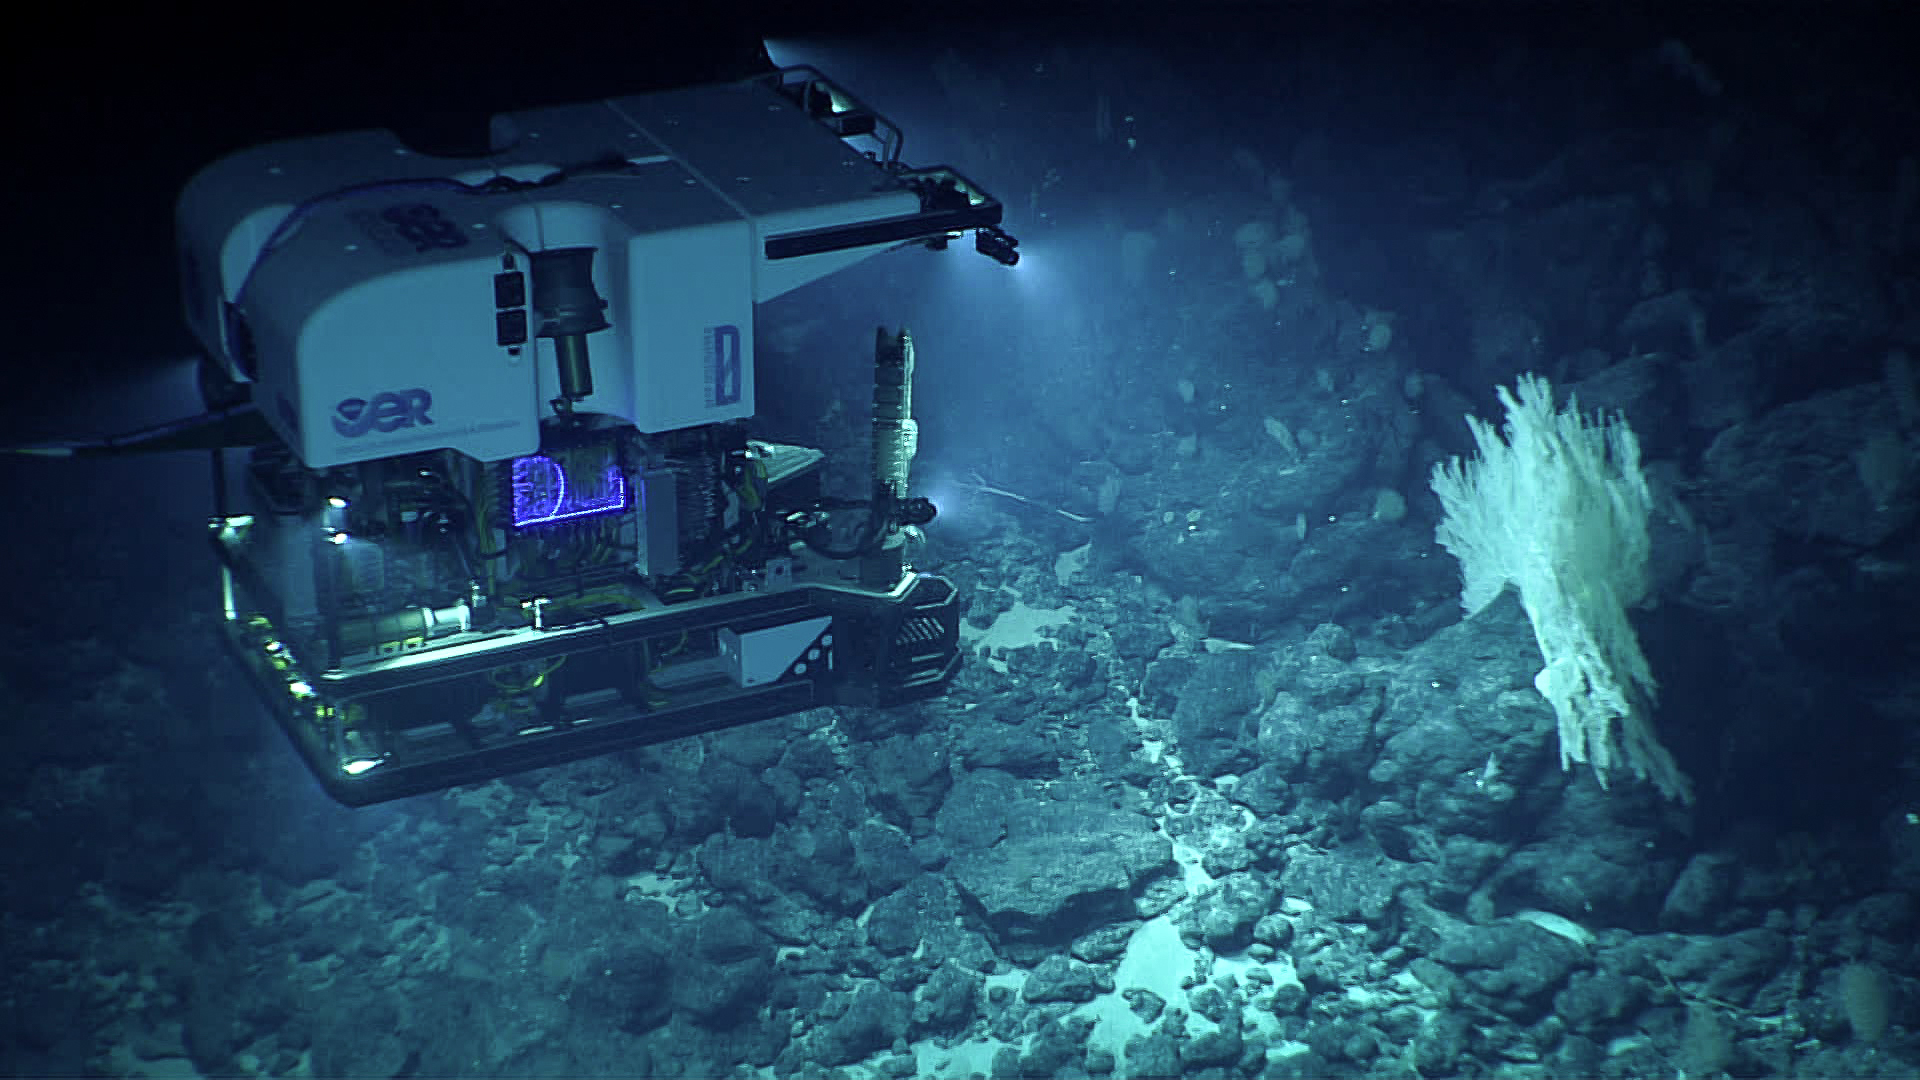 Remotely Operated Vehicle Deep Discoverer Technology Submersibles Noaa Office Of Ocean Exploration And Research